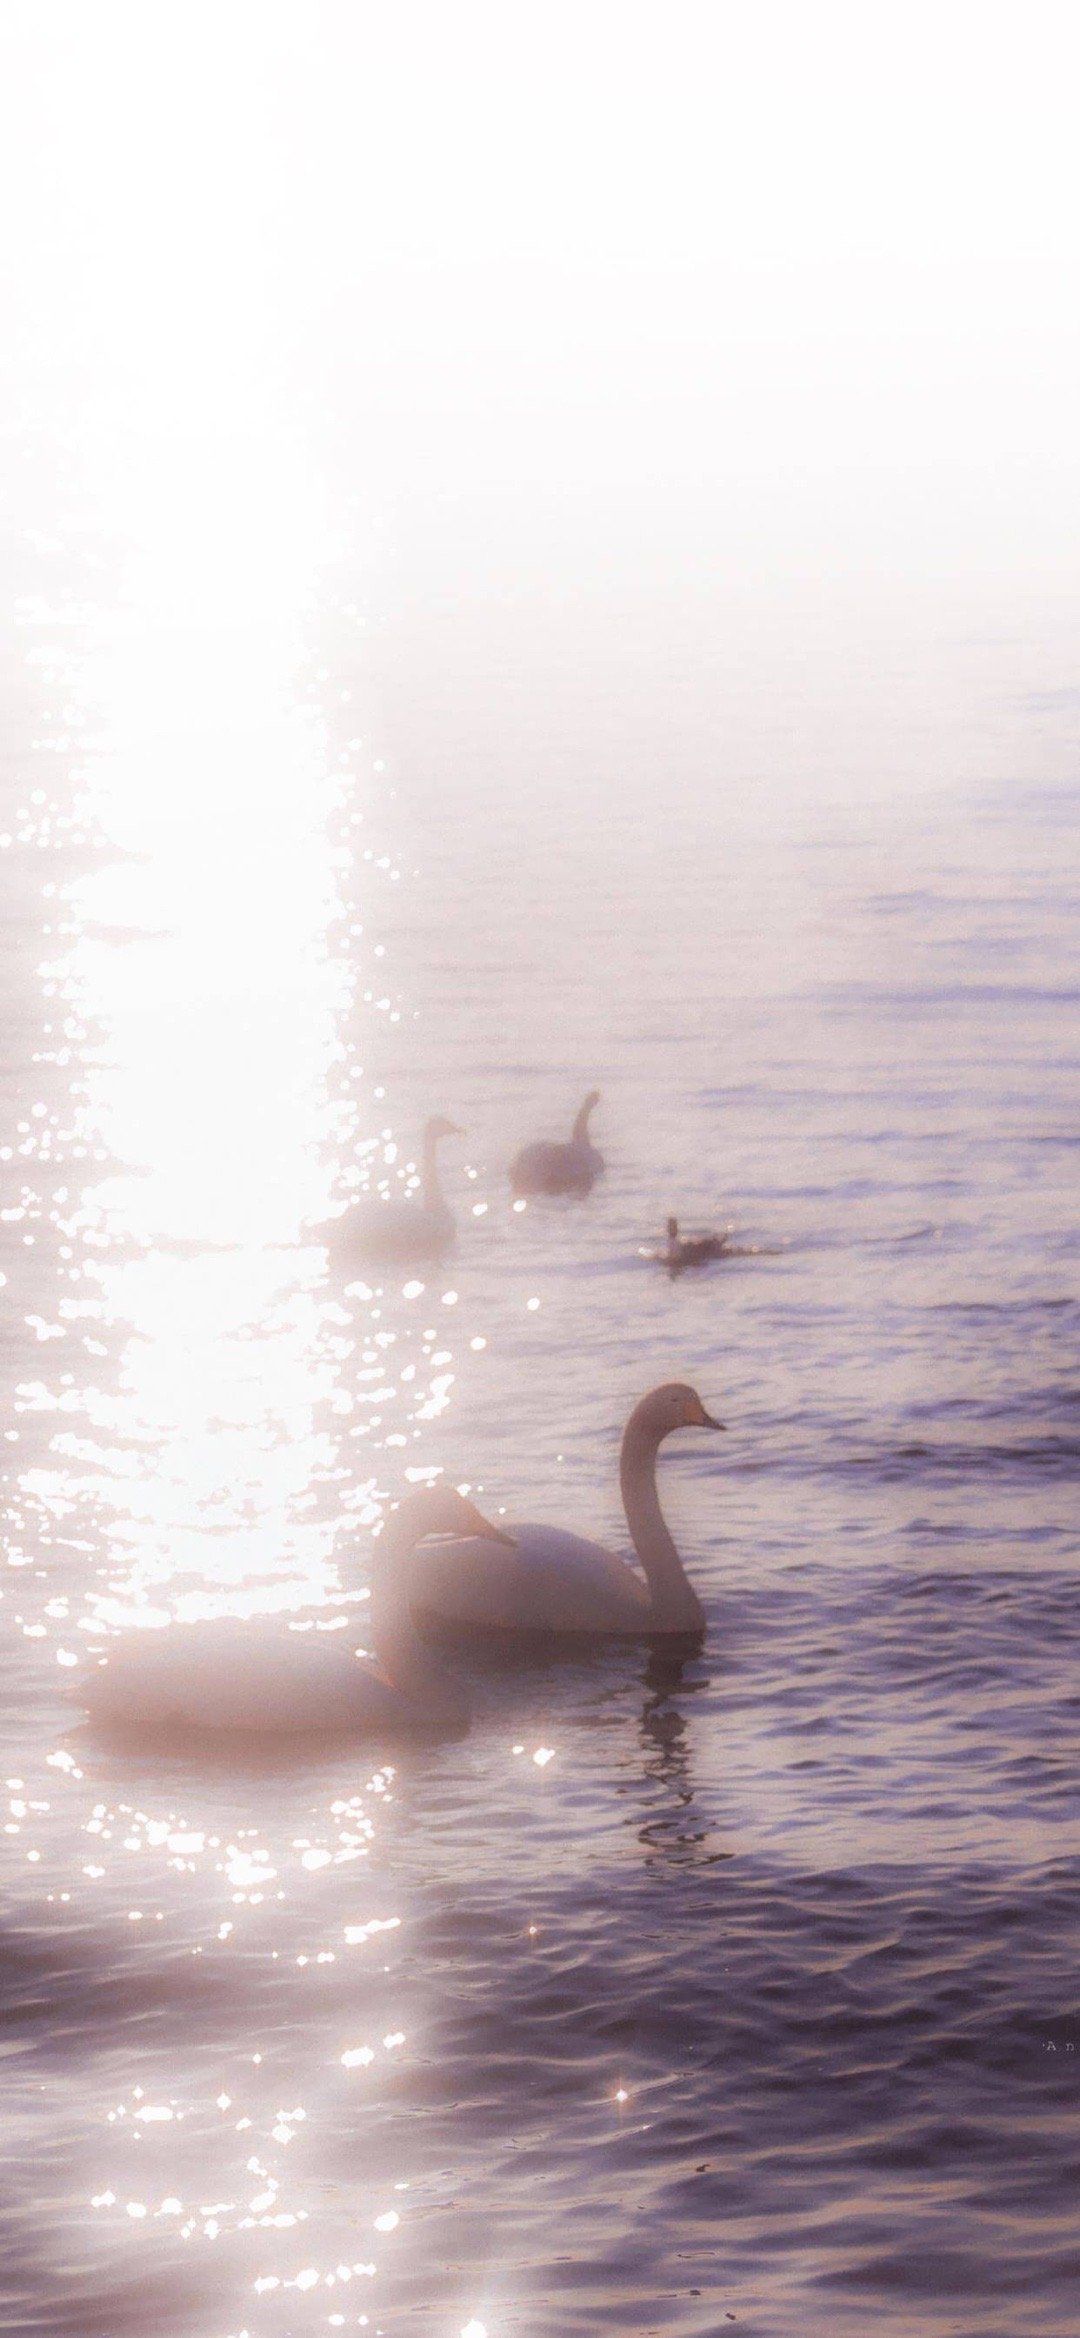 A group of swans floating in the water - Bling